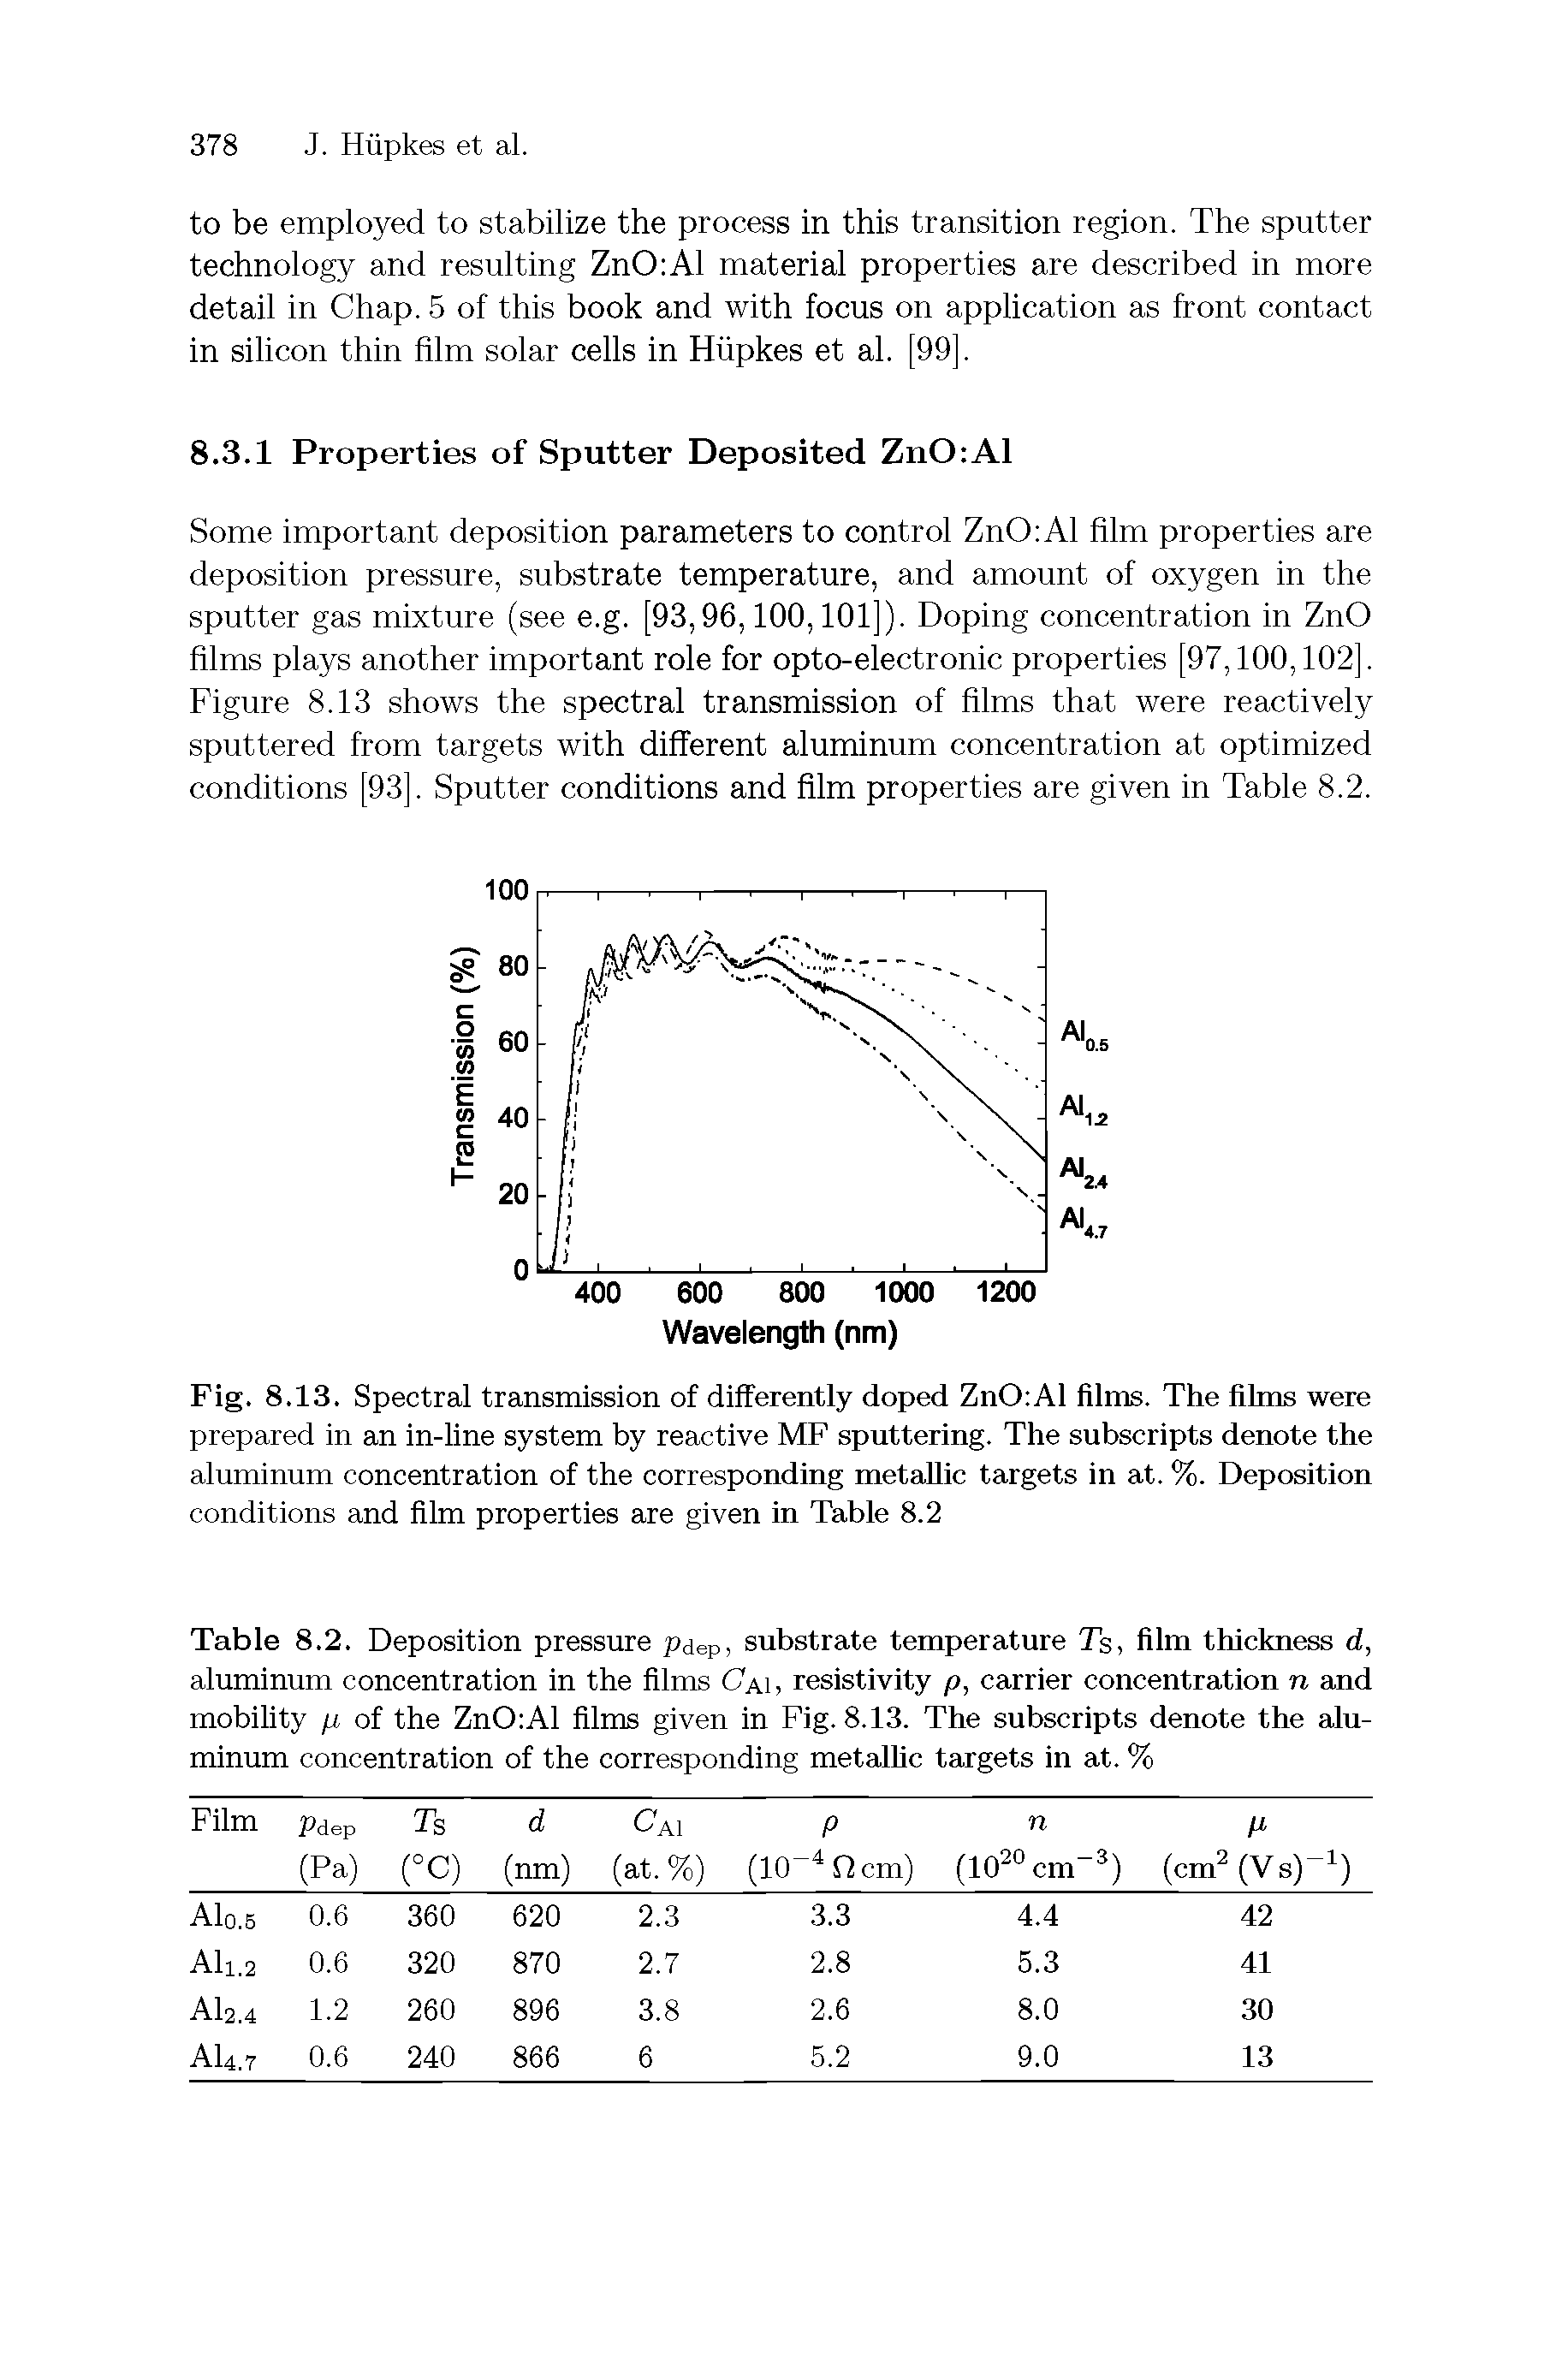 Fig. 8.13. Spectral transmission of differently doped ZnO Al films. The films were prepared in an in-line system by reactive MF sputtering. The subscripts denote the aluminum concentration of the corresponding metallic targets in at. %. Deposition conditions and film properties are given in Table 8.2...